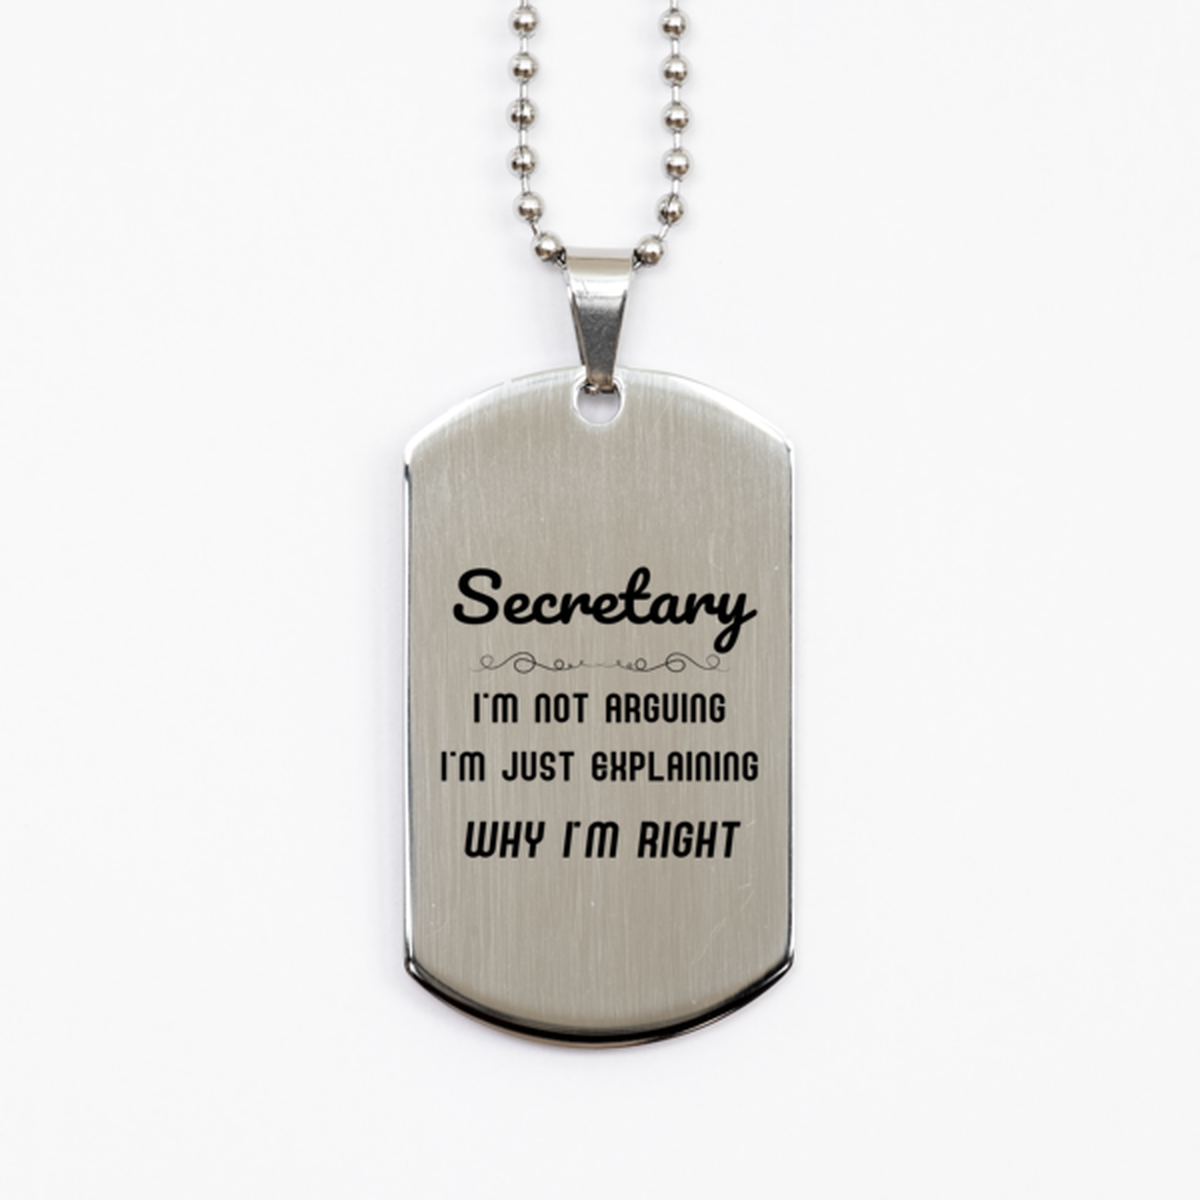 Secretary I'm not Arguing. I'm Just Explaining Why I'm RIGHT Silver Dog Tag, Funny Saying Quote Secretary Gifts For Secretary Graduation Birthday Christmas Gifts for Men Women Coworker